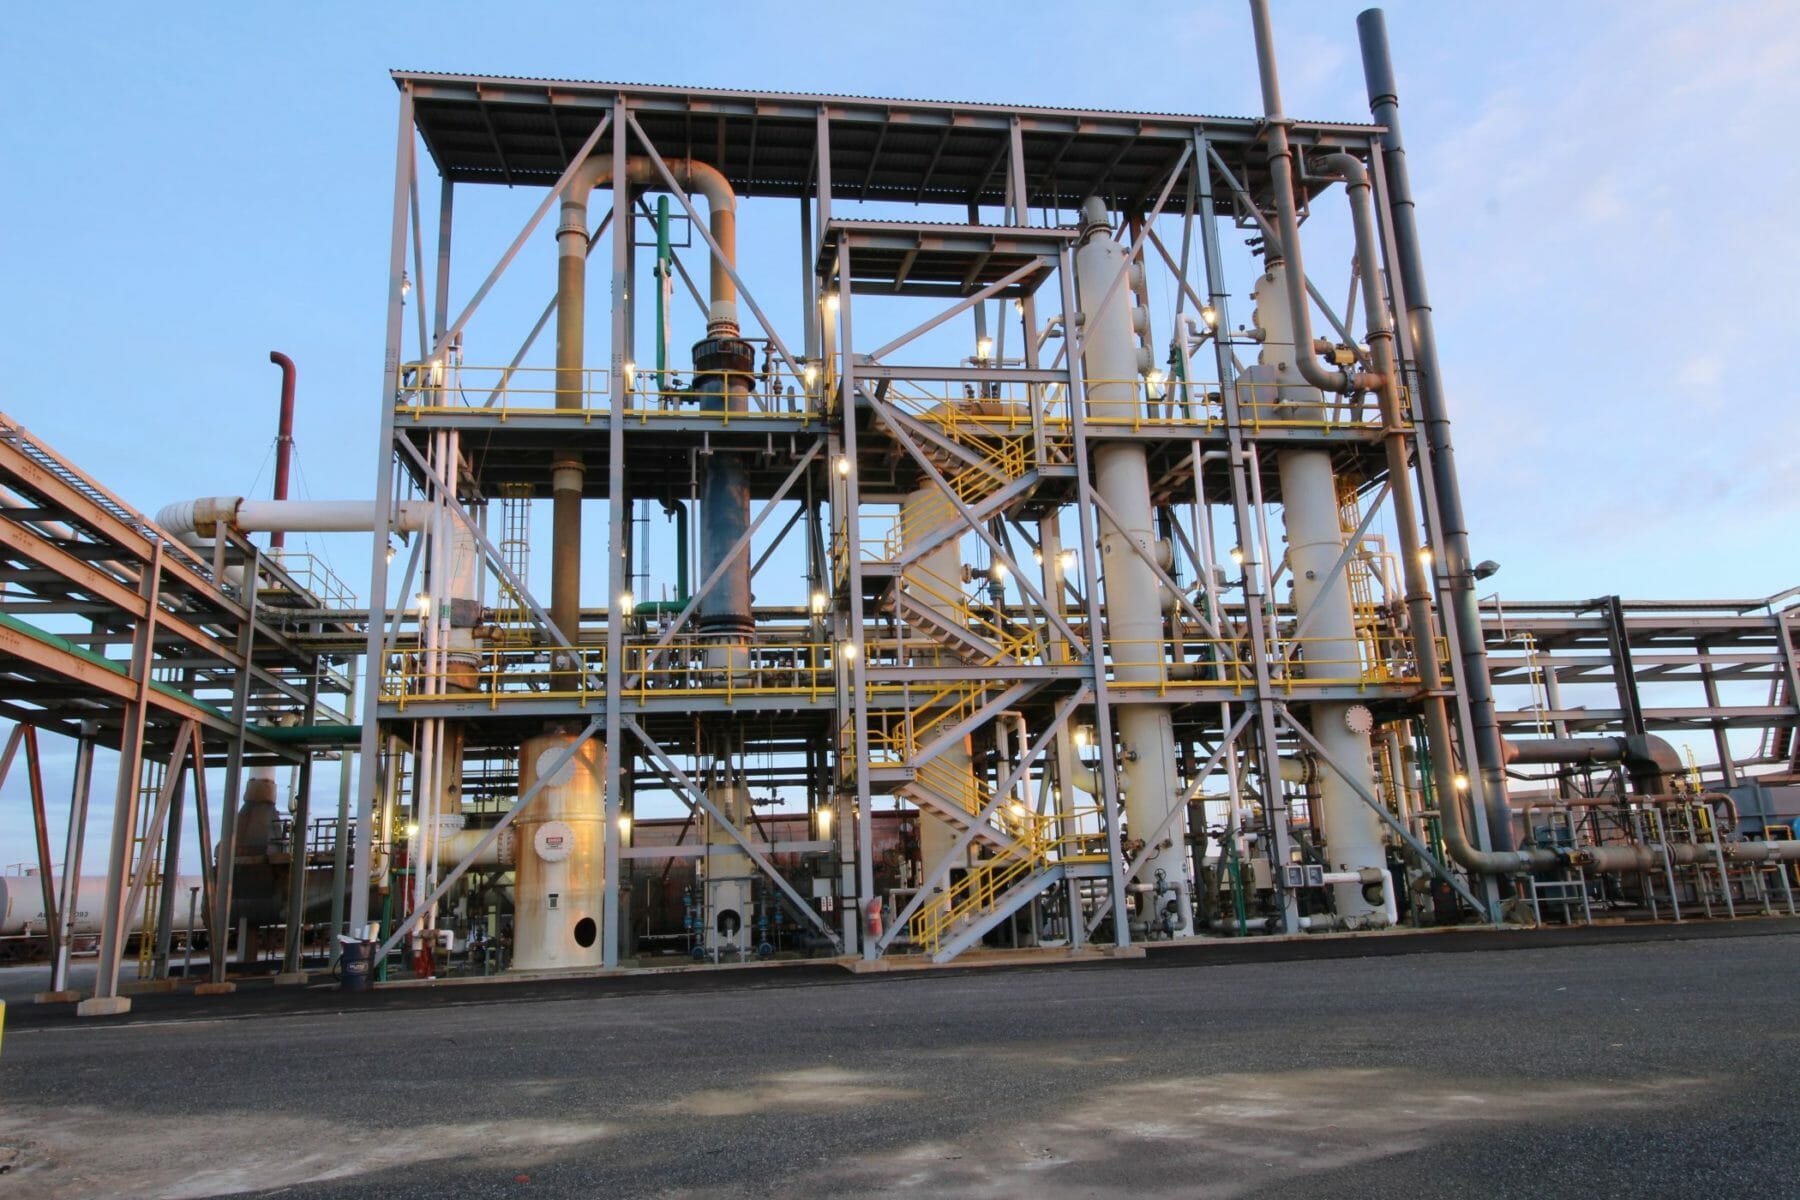 structural steel contractors erect framing for above-ground pipes | Industrial Plant Construction Contractors | Wollam Construction